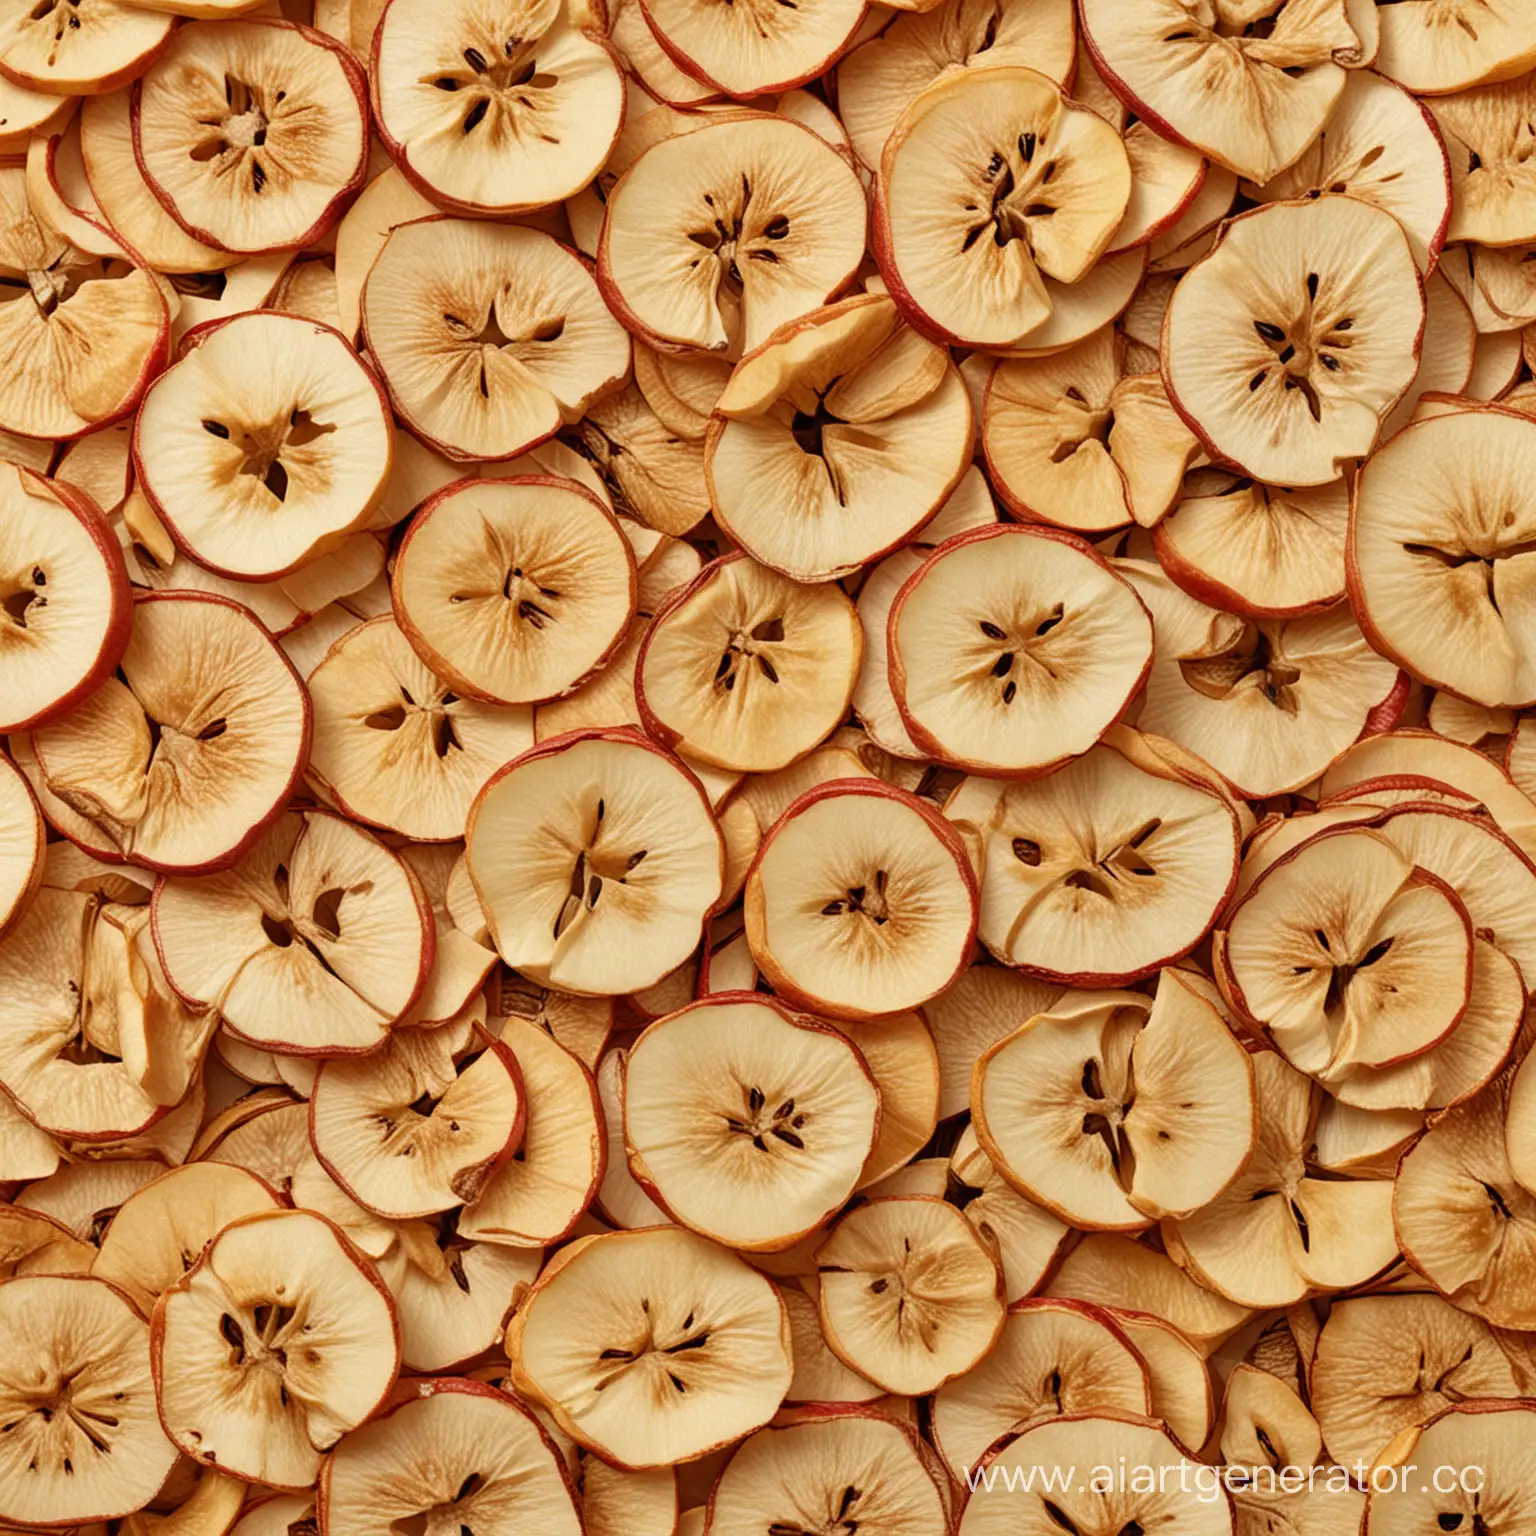 Rustic-Dried-Apple-Slices-on-Wooden-Tray